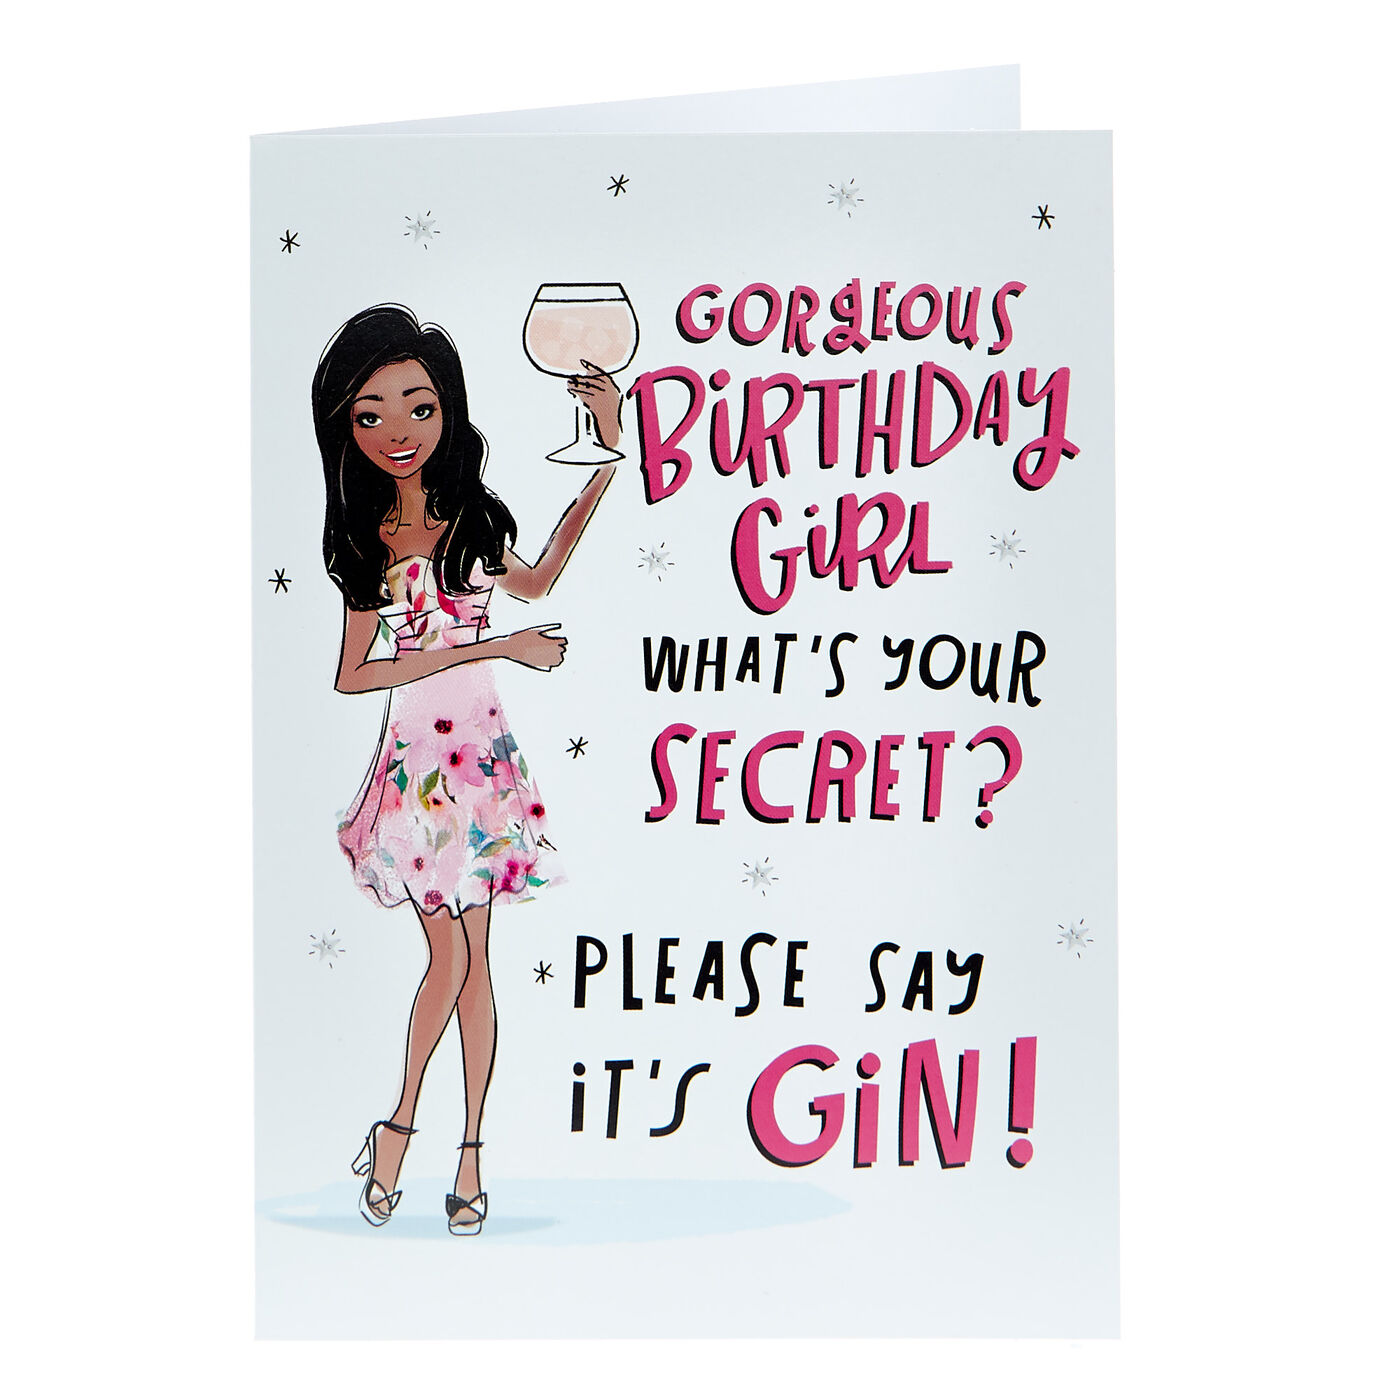 Buy Birthday Card - Girl What's Your Secret? for GBP 1.49 | Card Factory UK